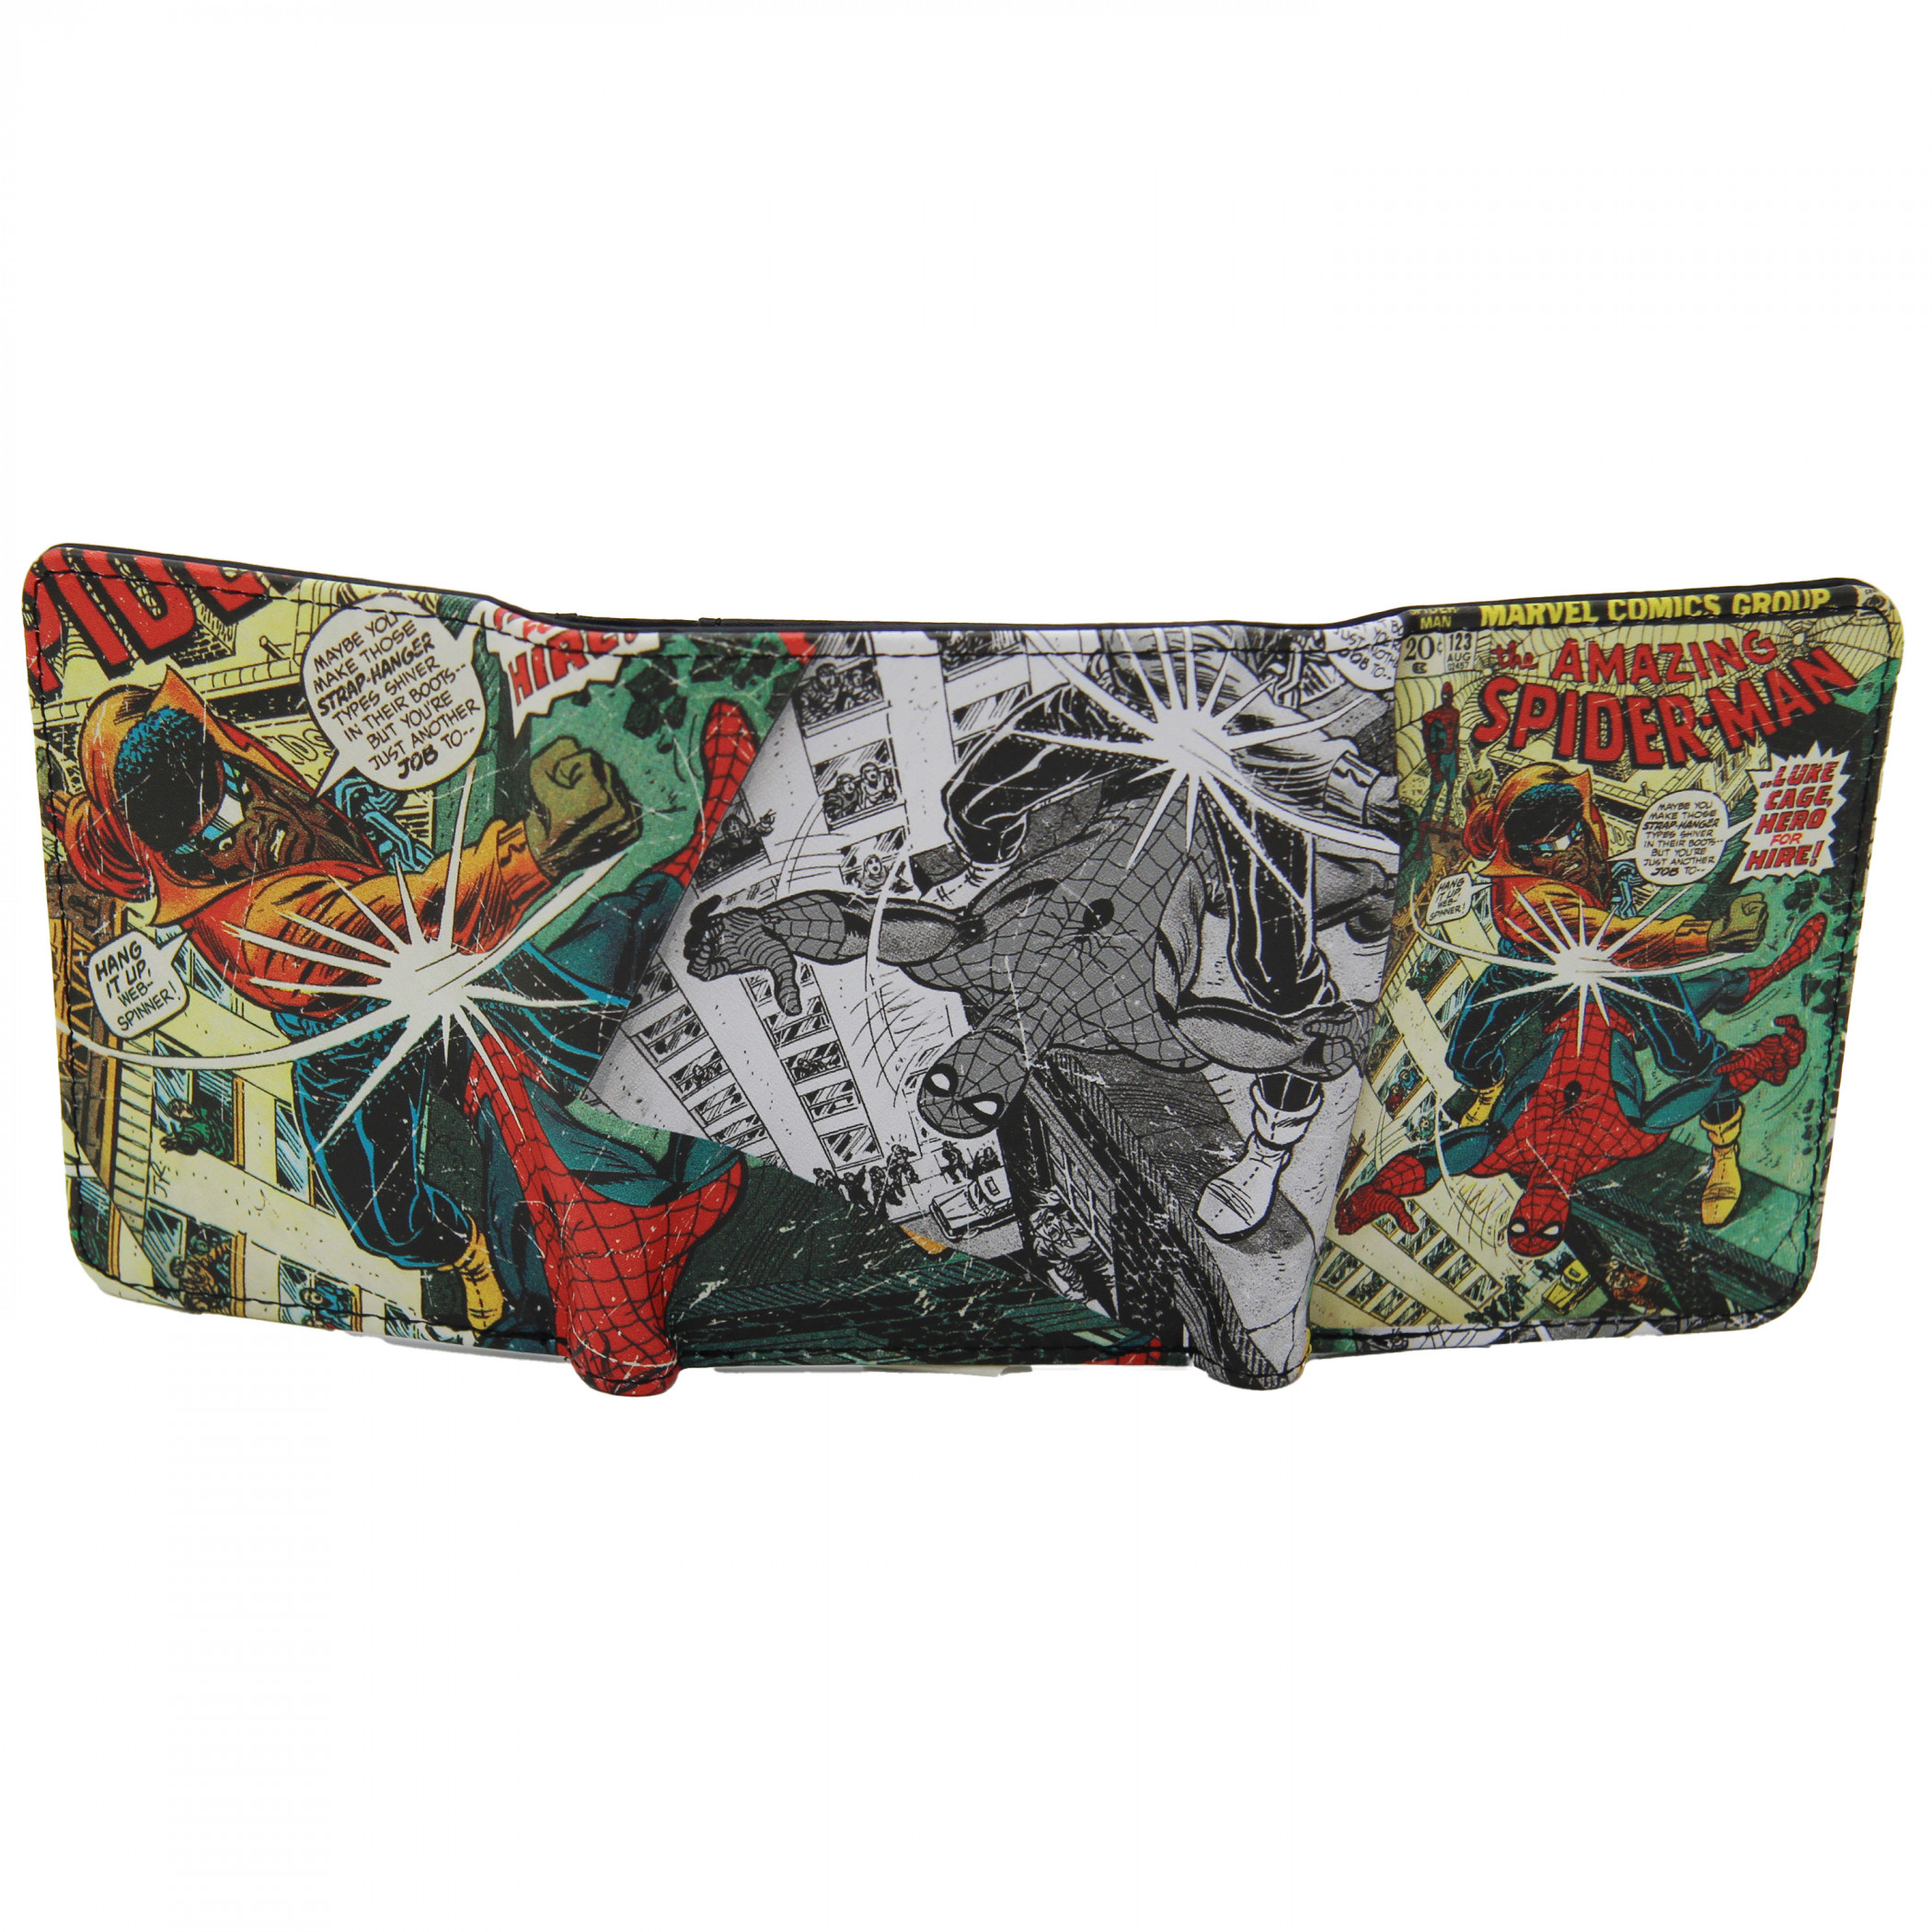 The Amazing Spider-Man Comic #123 Trifold Wallet